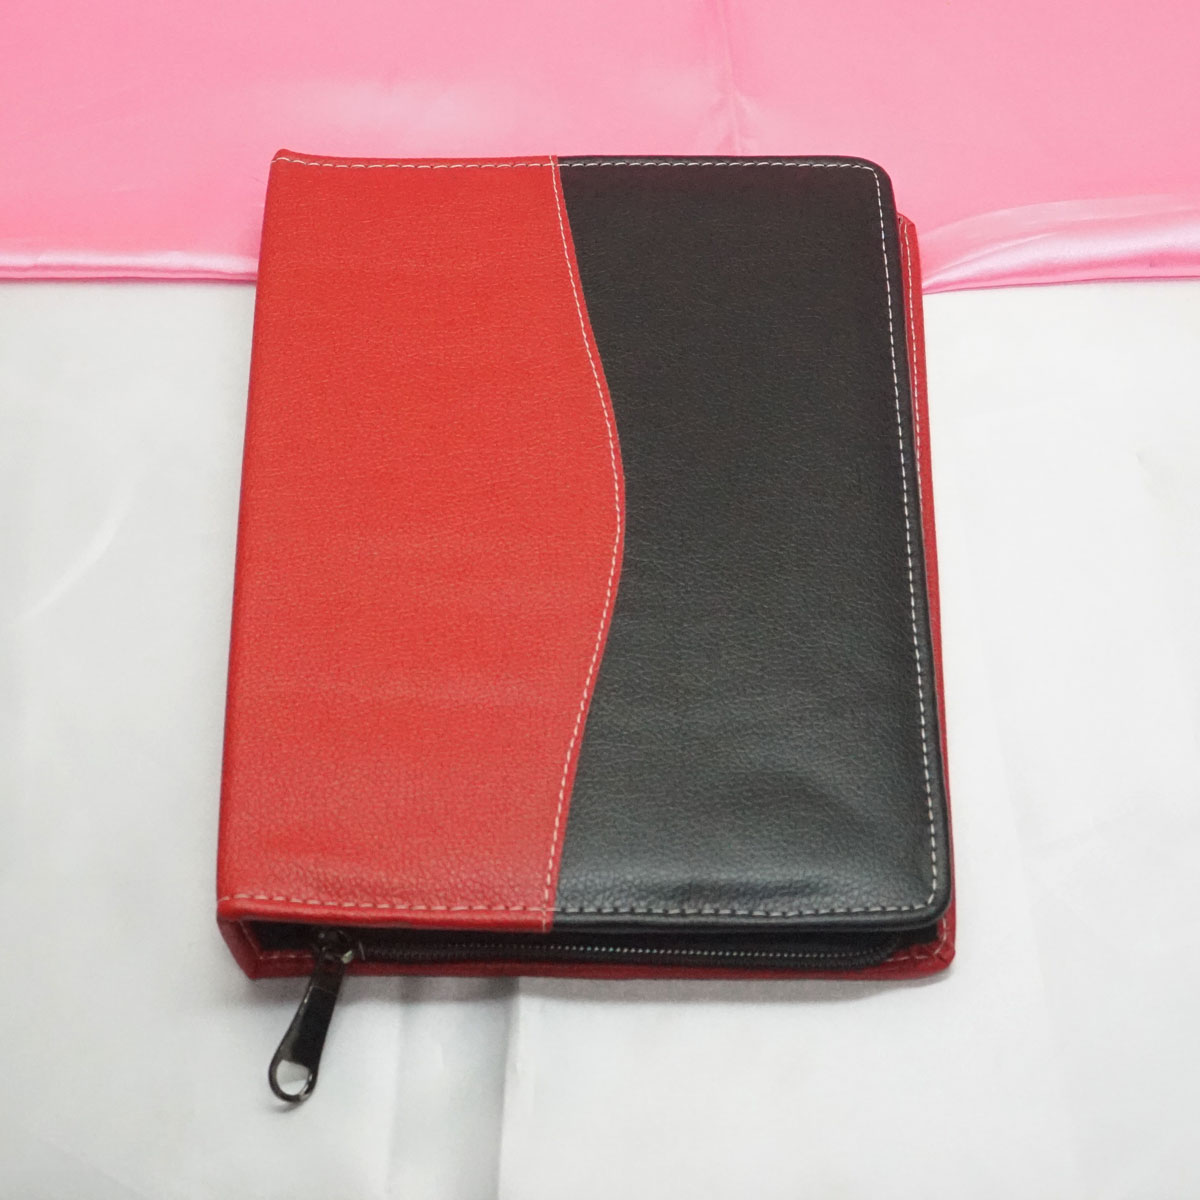 penhouse.in Red With Black Color File With 33 Pen Slot Velvet Division Rexin Finish Zip Type Only For  Pen Holders SKU 21902